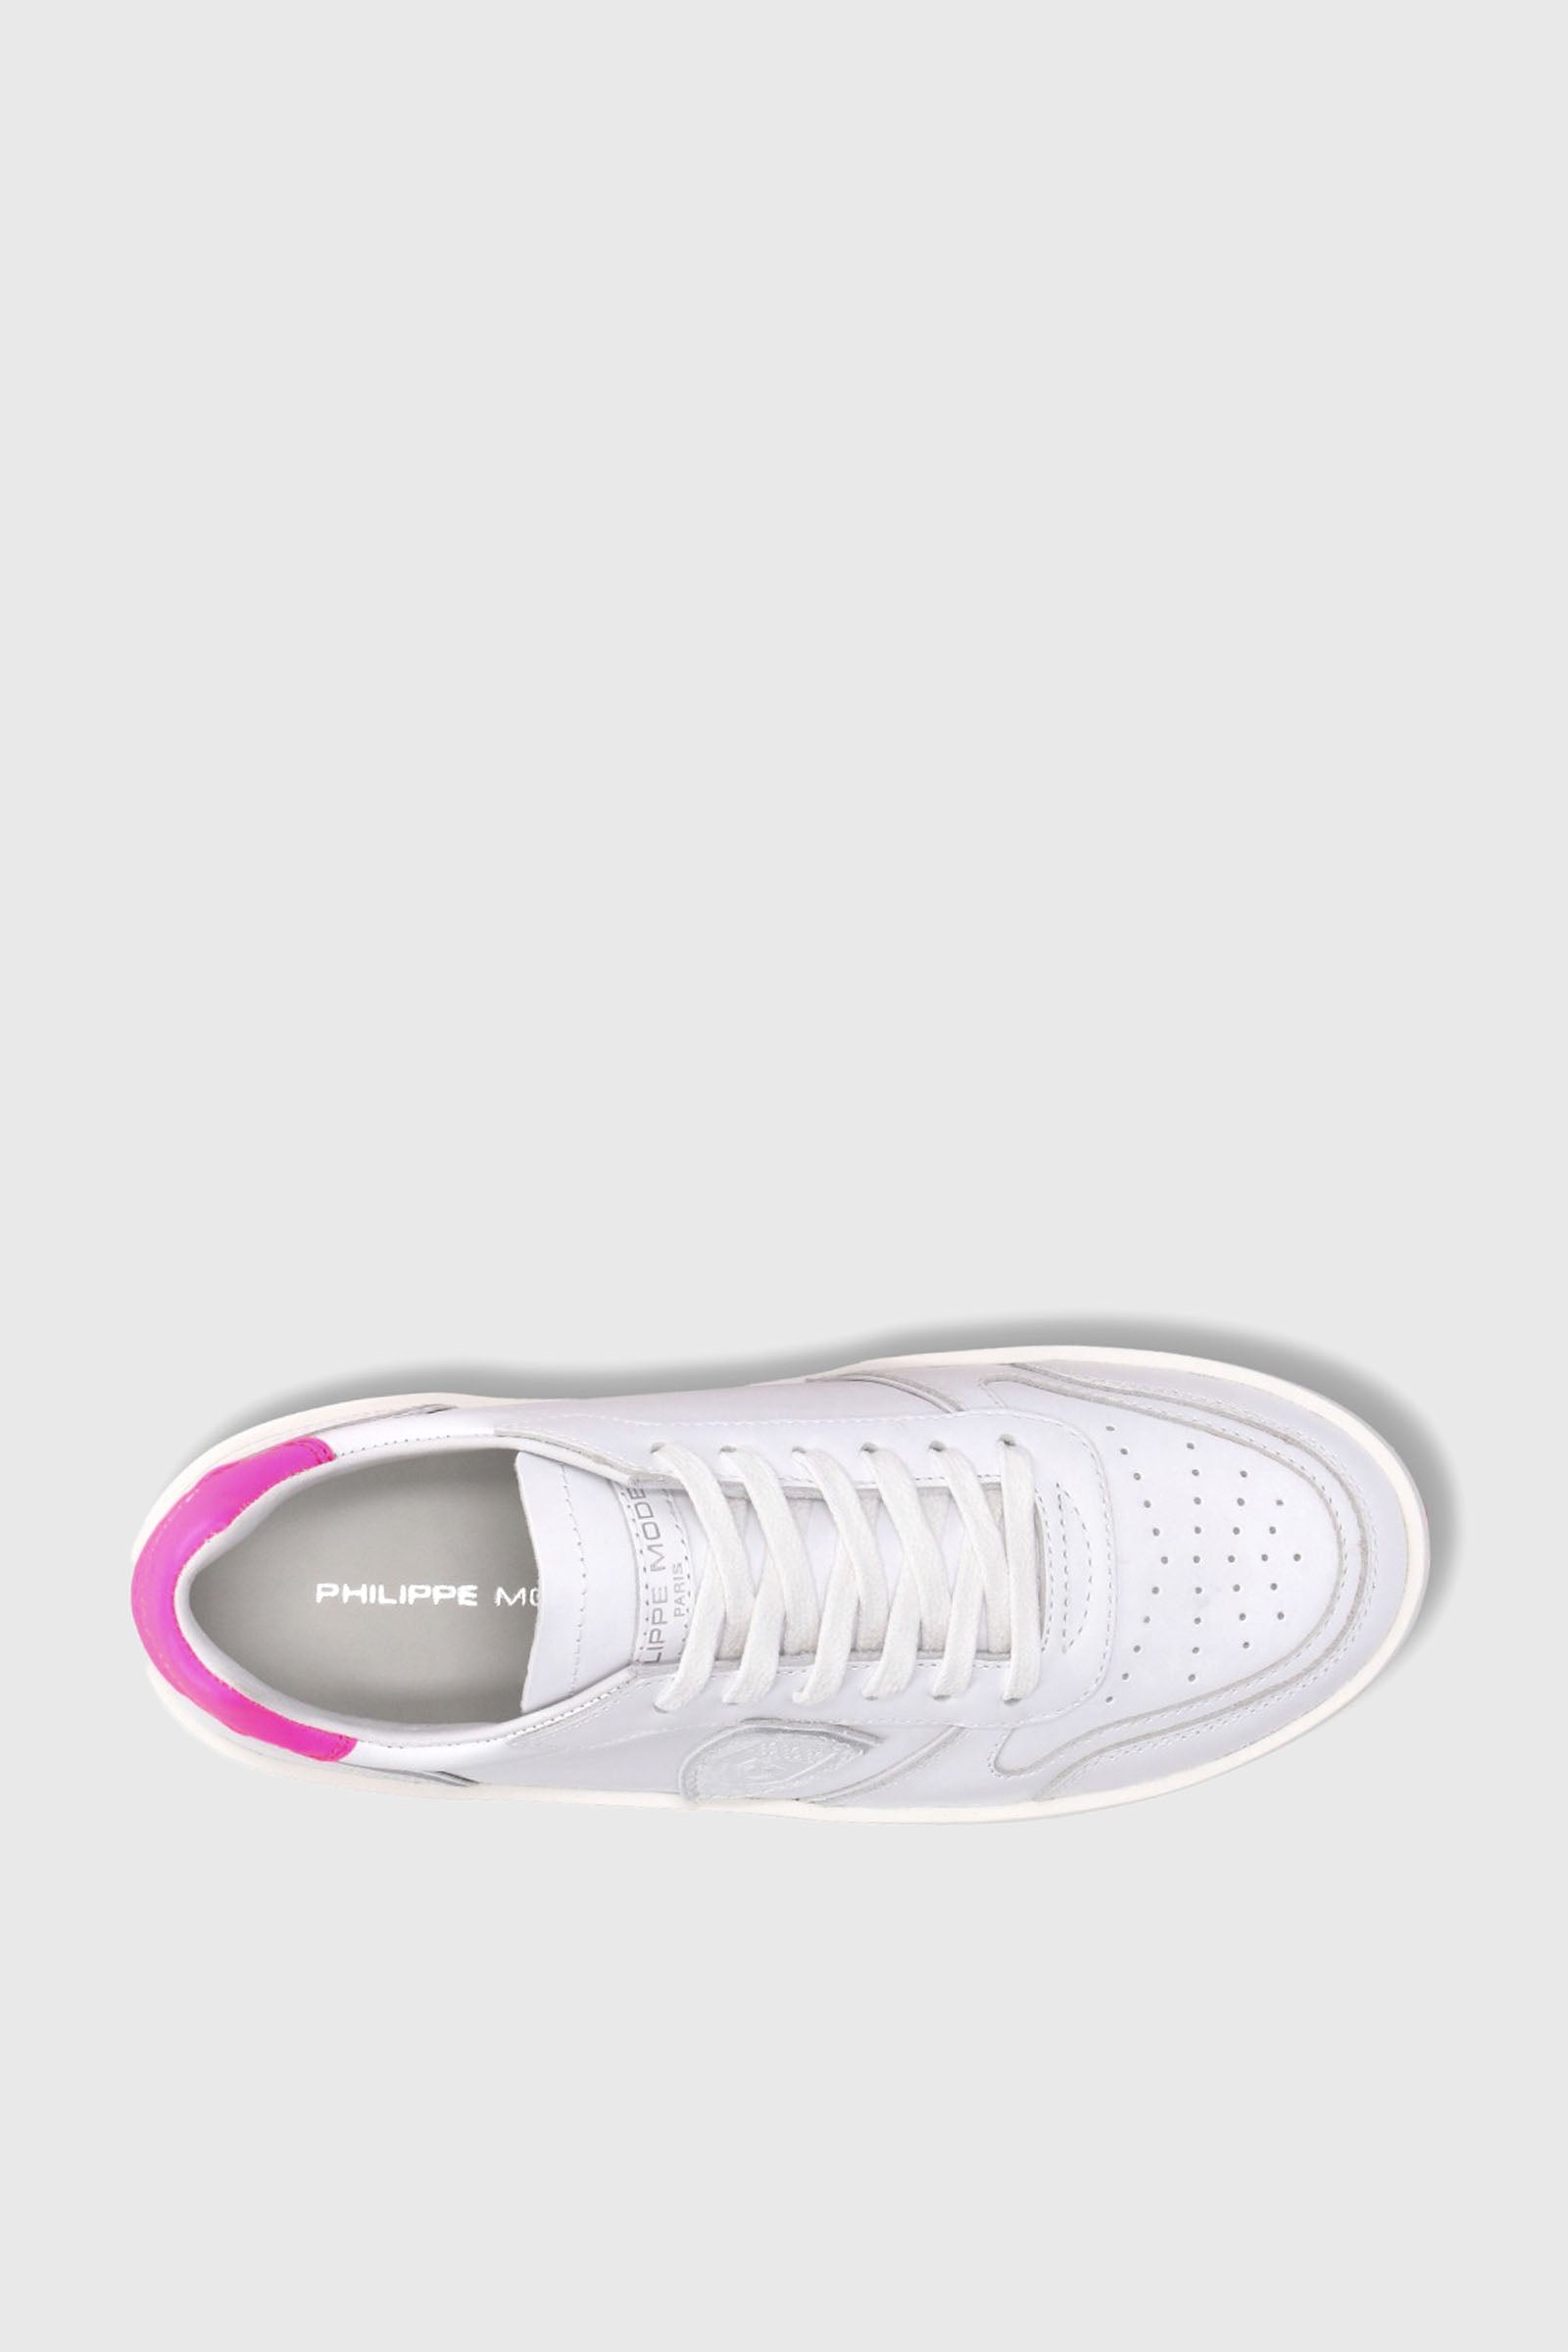 Philippe Model Sneaker Nice Veau Leather White/Fuxia - 4